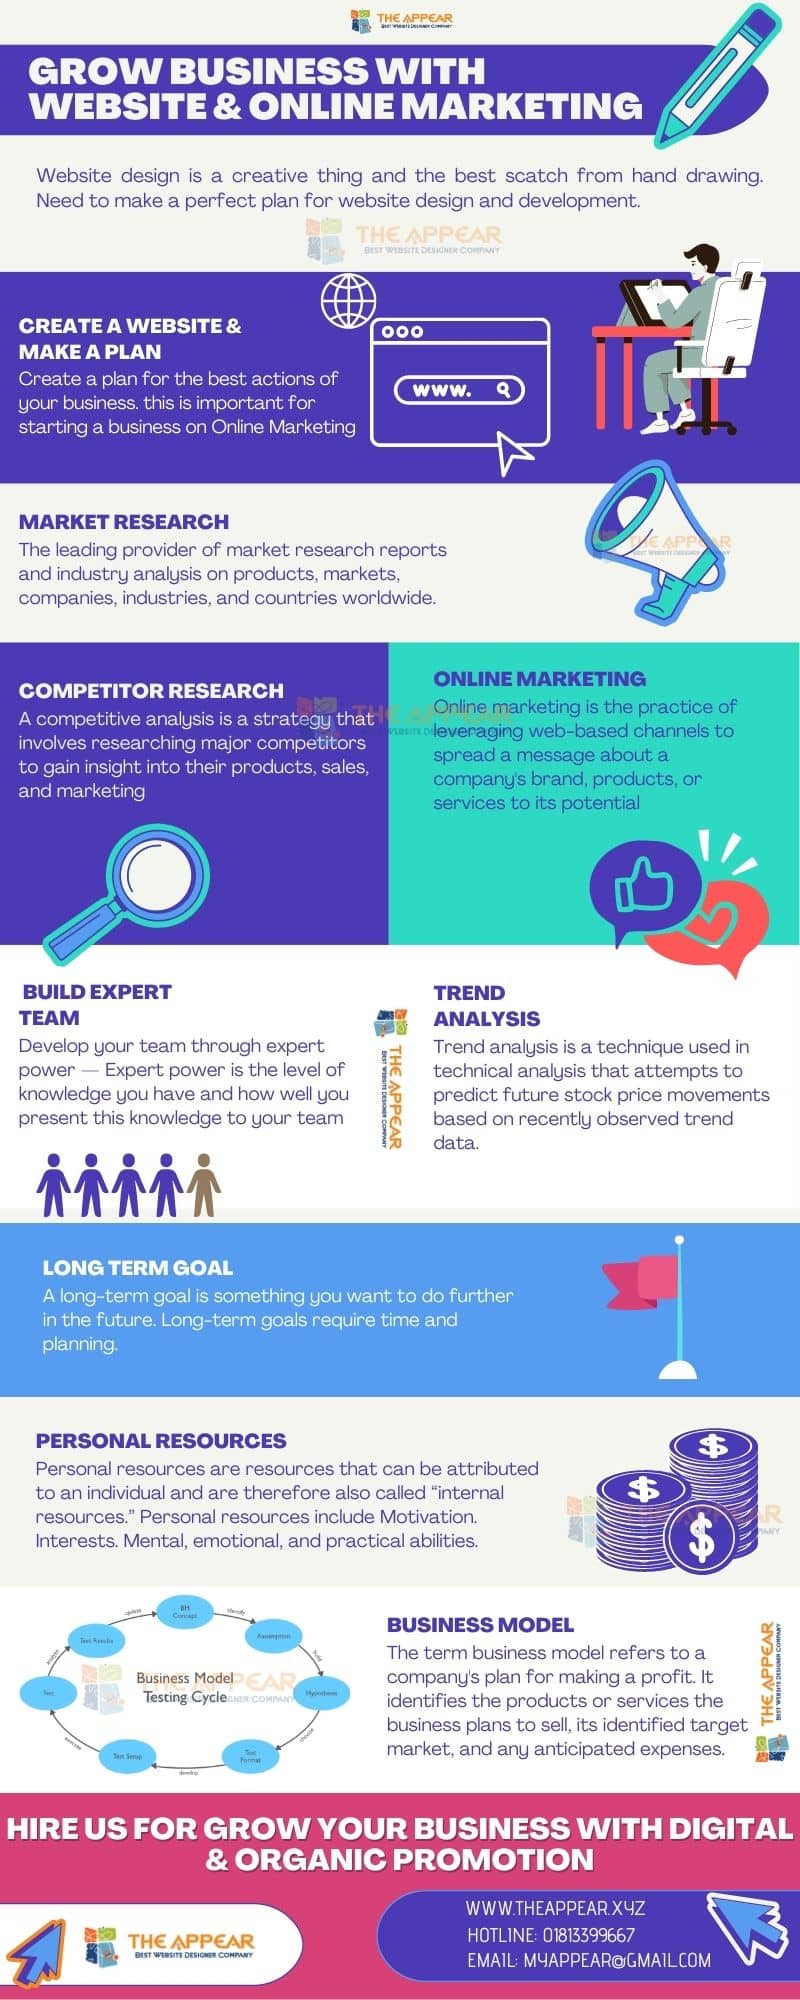 This is infographic for grow business with website and digital marketing